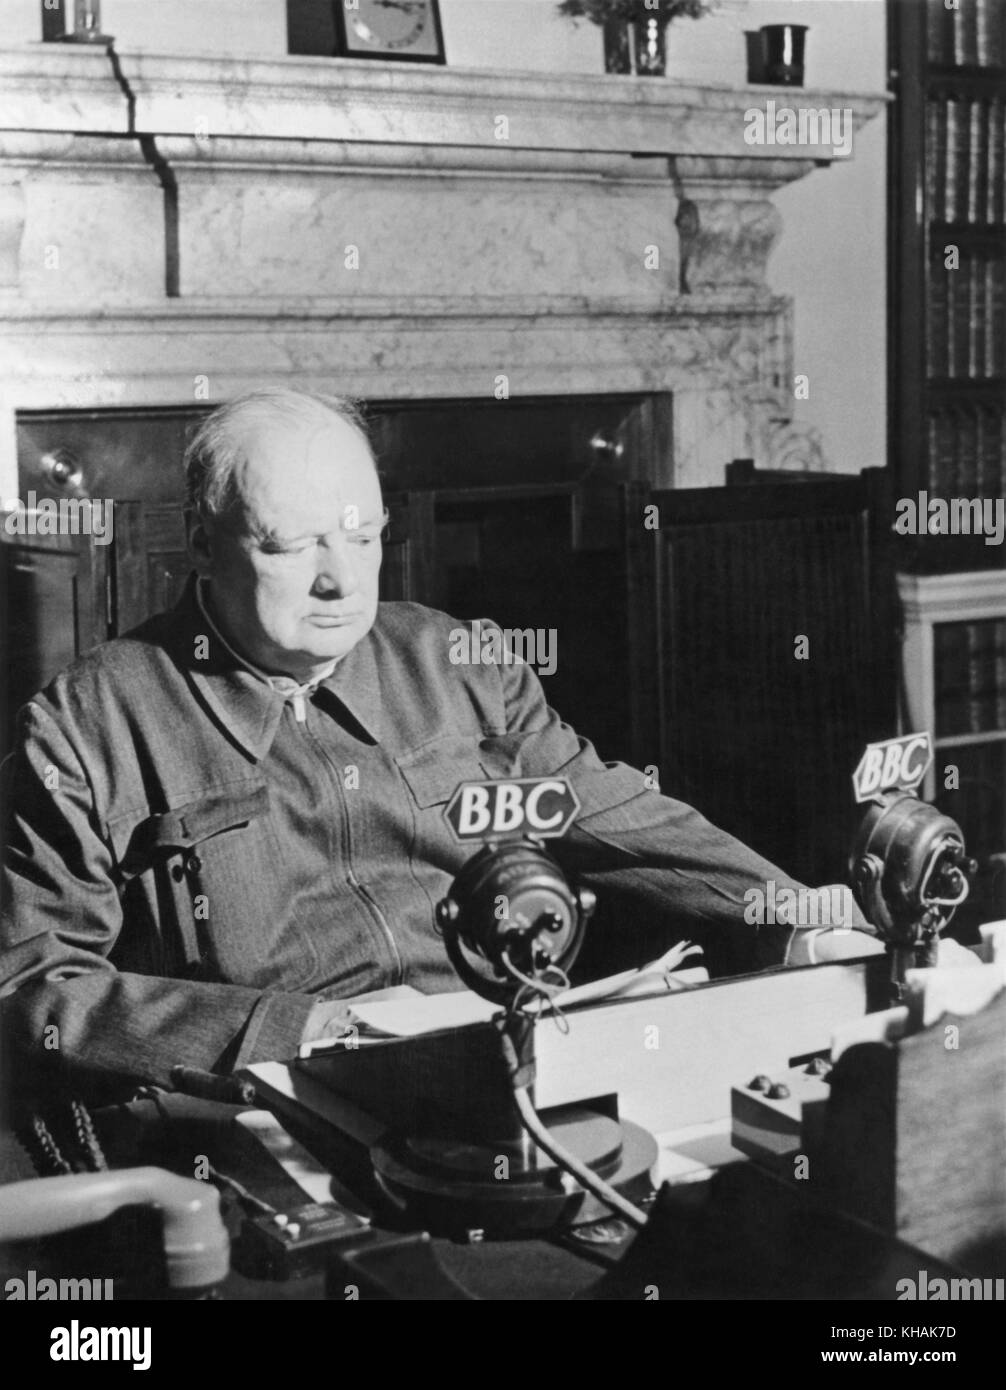 WInston Churchill, Prime Minister of Great Britain, broadcasting from the BBC to Europe in June of 1942. Stock Photo